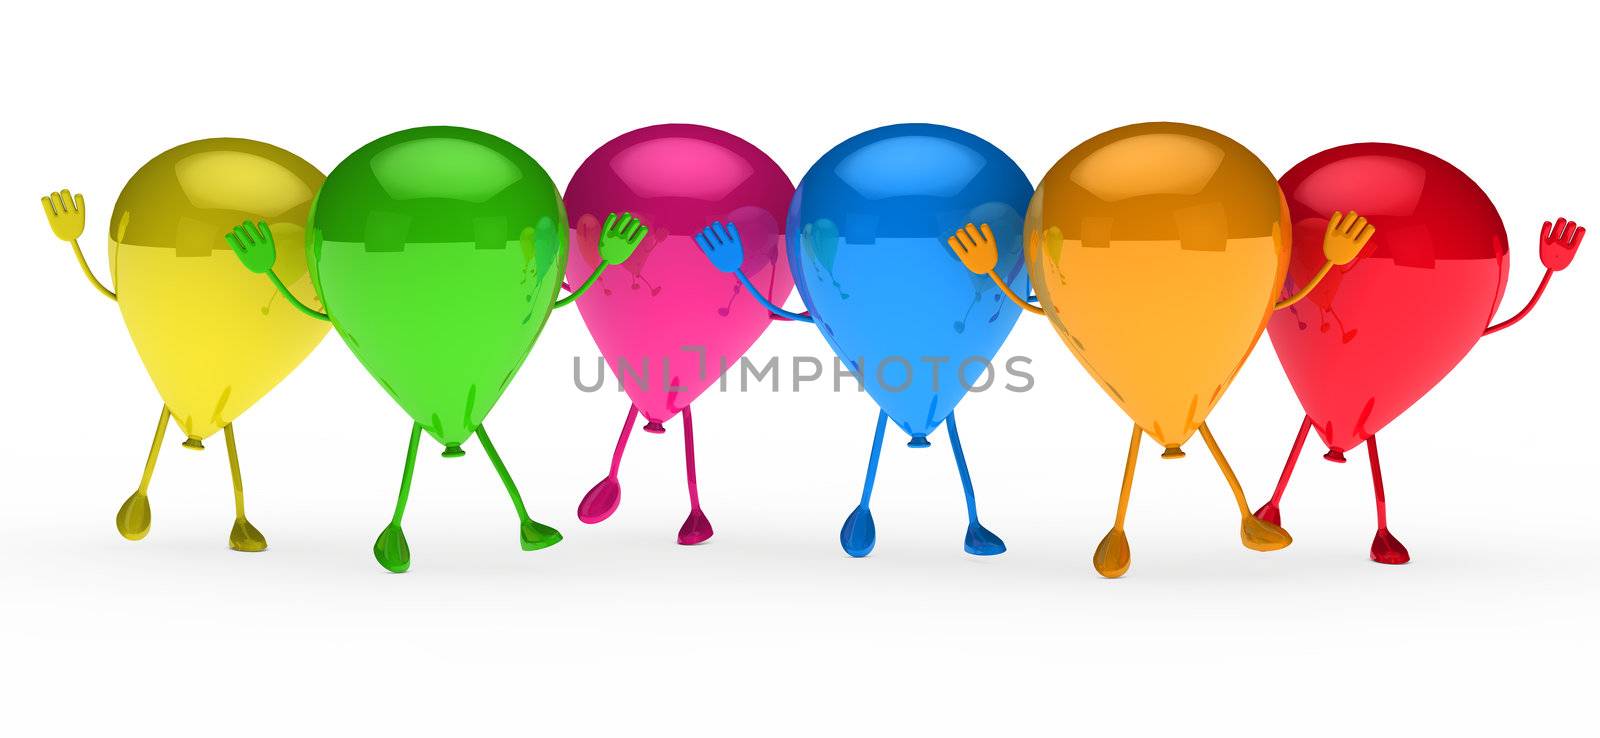 Colorful Party balloons stand and wave hands